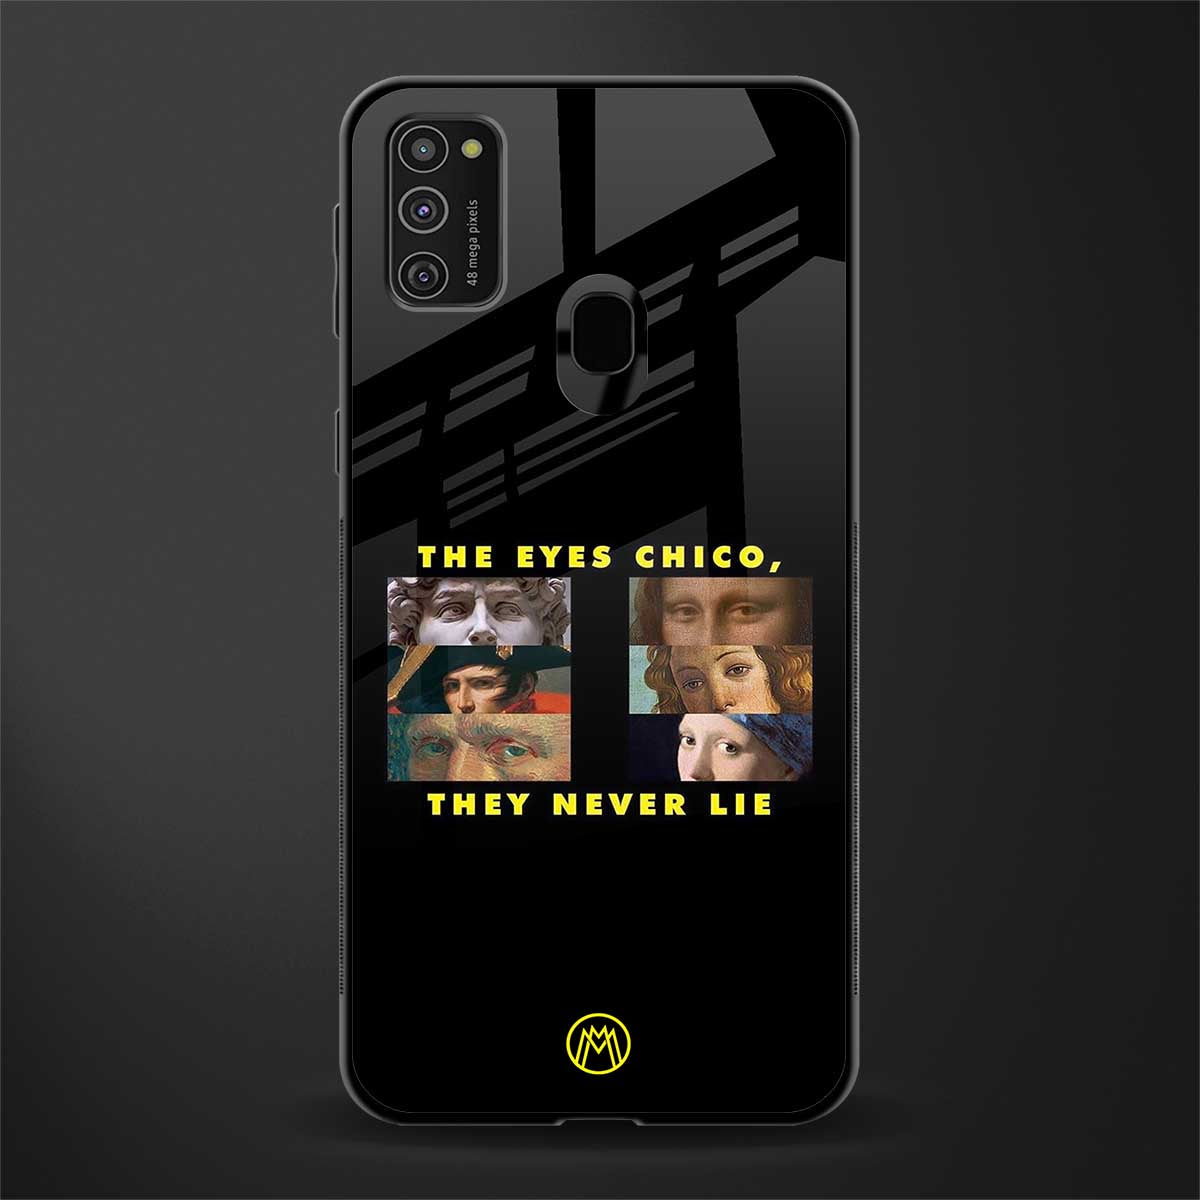 the eyes chico, they never lie movie quote glass case for samsung galaxy m30s image